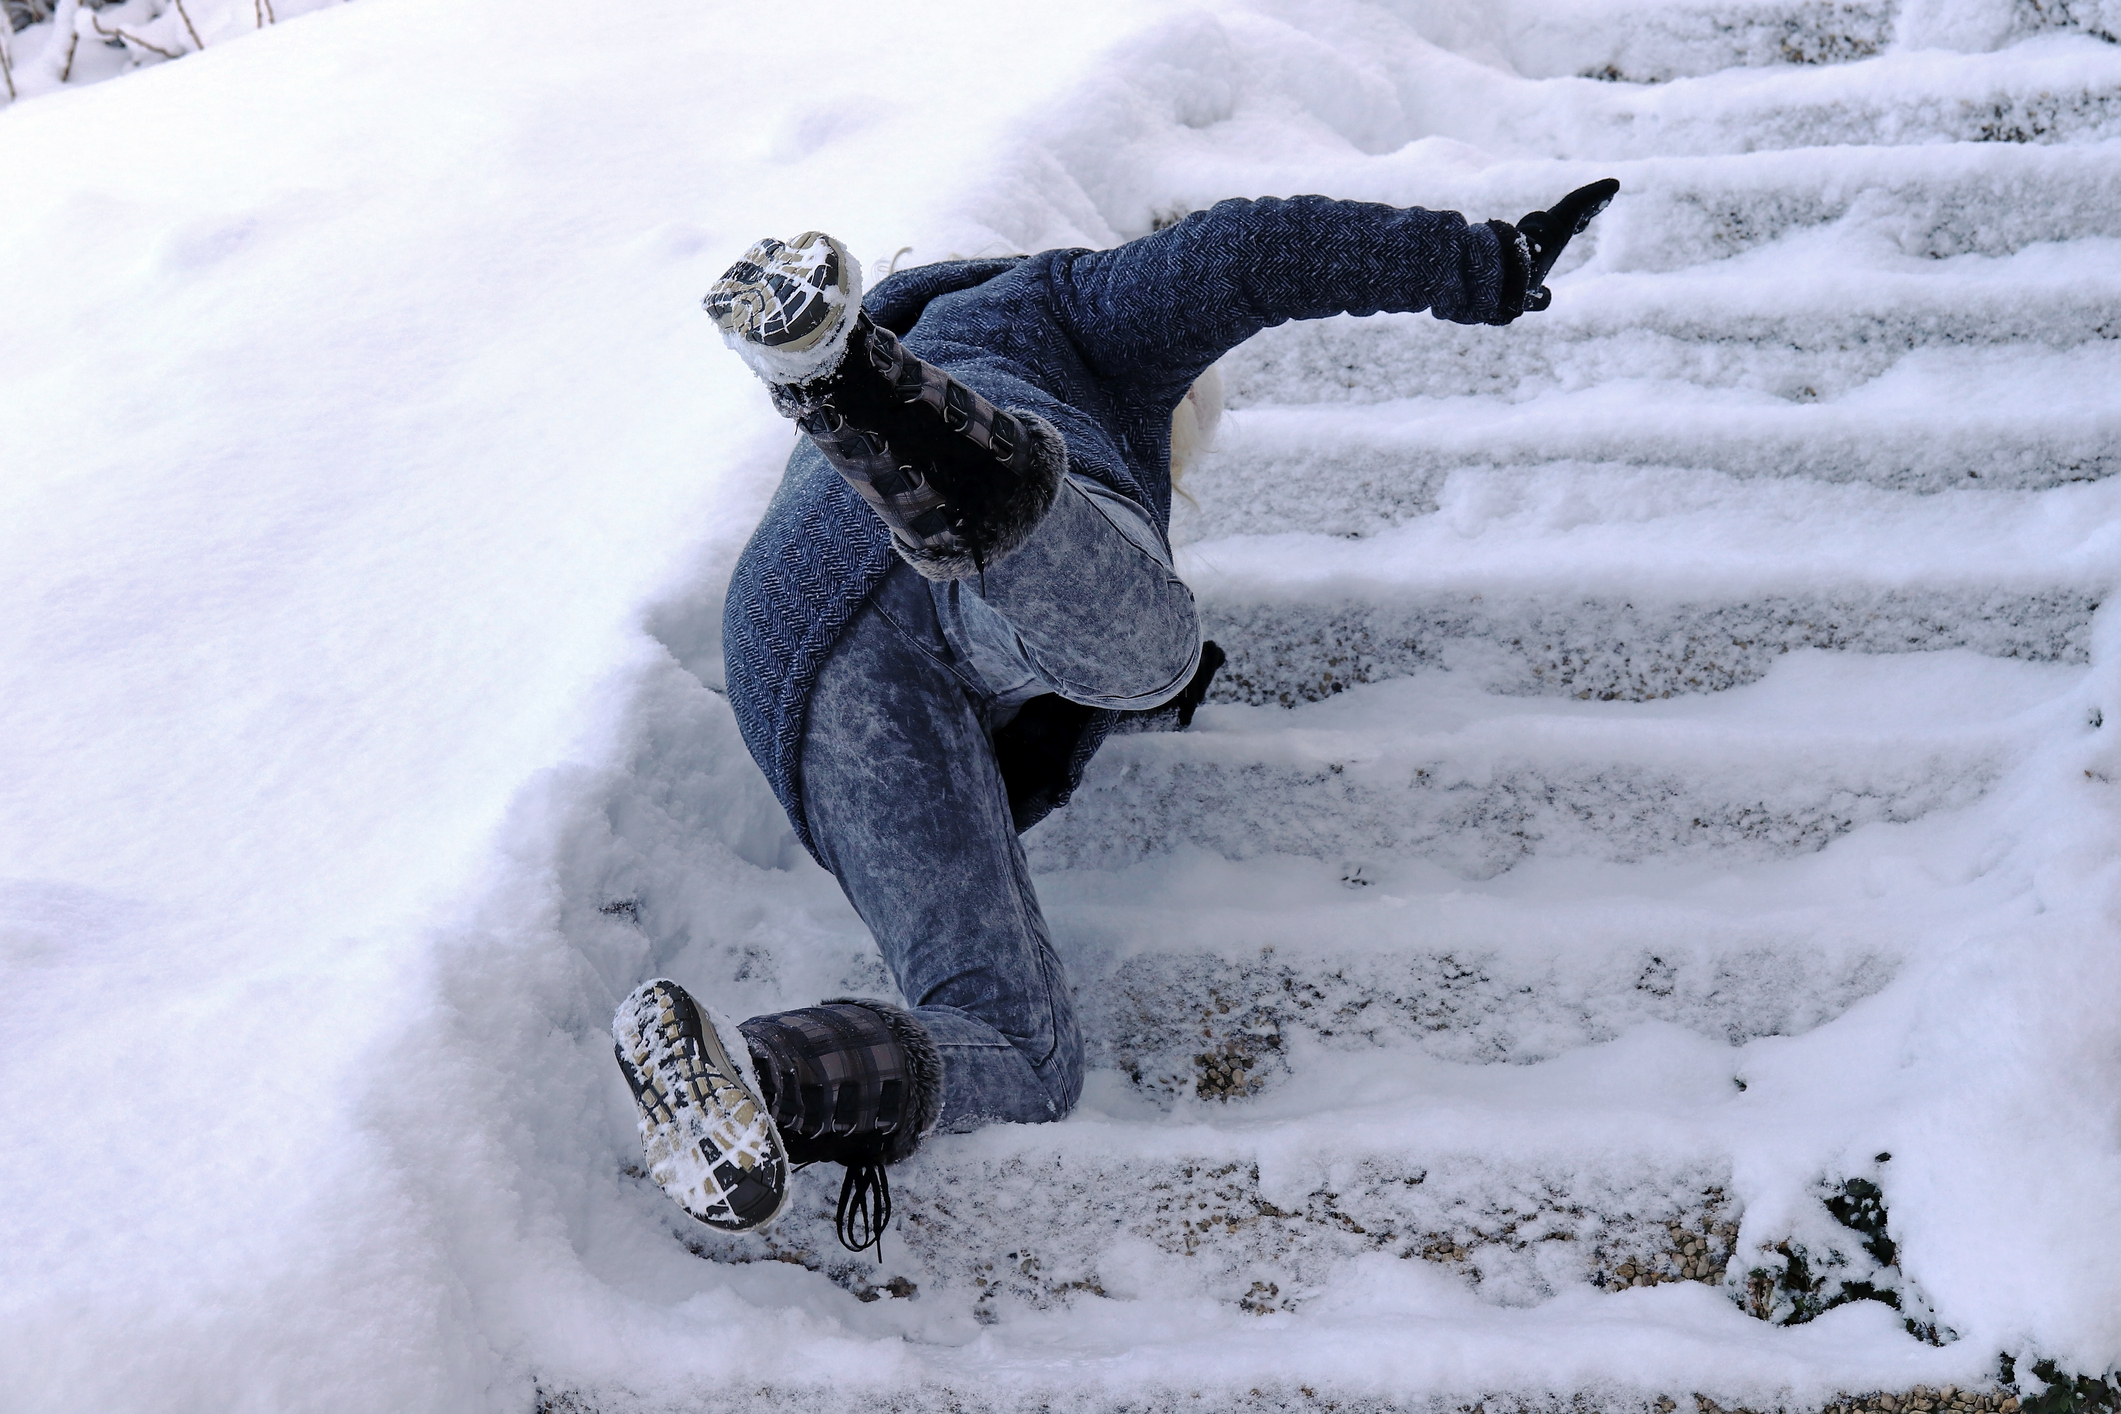 Icy Conditions Create Slip Fall Hazards Diller Law Personal Injury Law